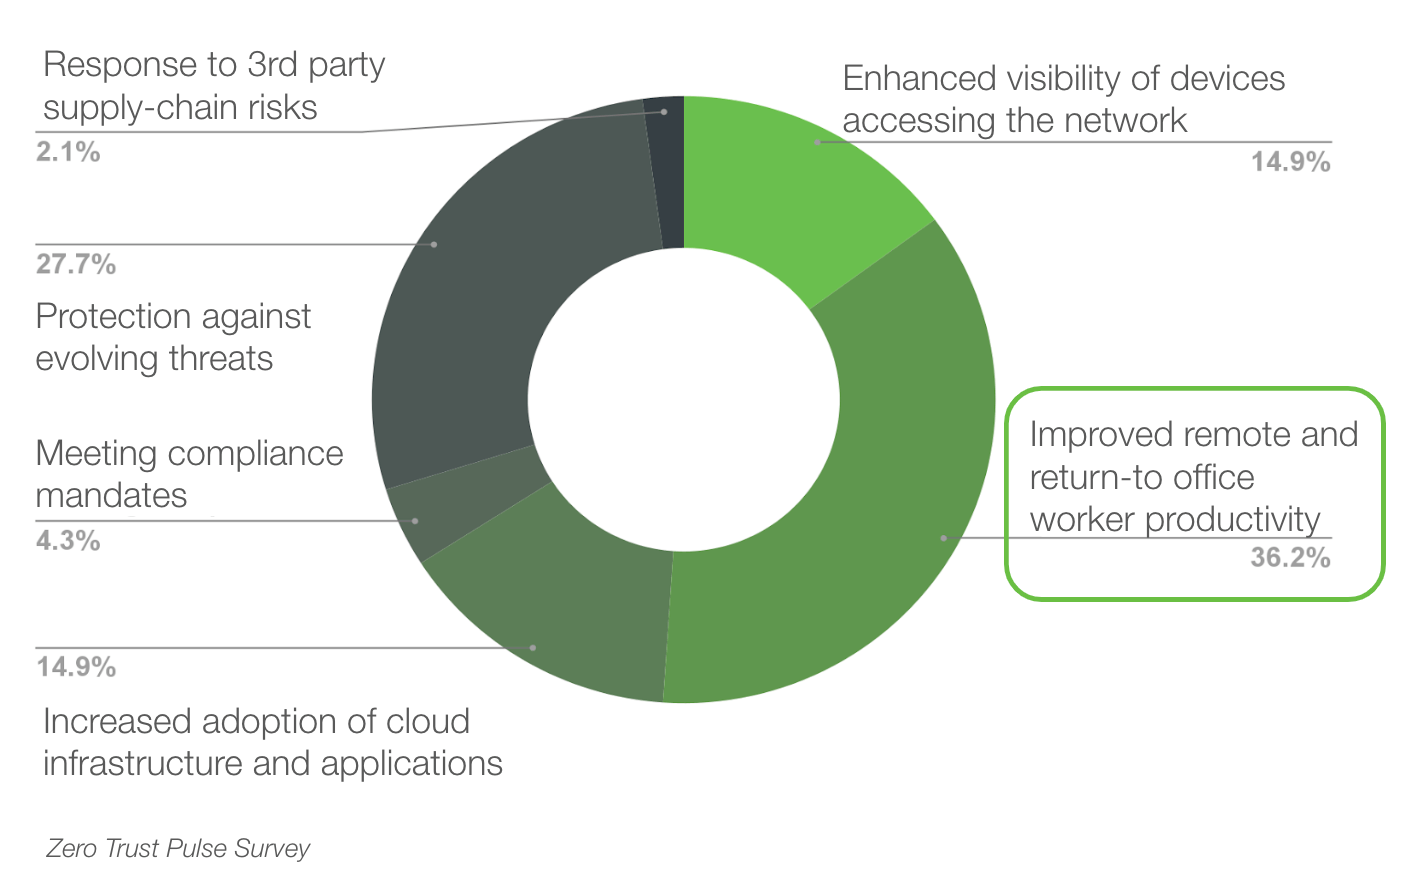 A graphic showing the expected outcomes of implementing zero trust. The outcomes are as follows: Improved remote and return-to-office worker productivity (36.2%), protection against evolving threats (27.7%), enhanced visibility of devices accessing the network (14.9%), increased adoption of cloud infrastructure and applications (14.9%), meeting compliance mandates (4.35), and response to third-party supply-chain risks (2.1%).